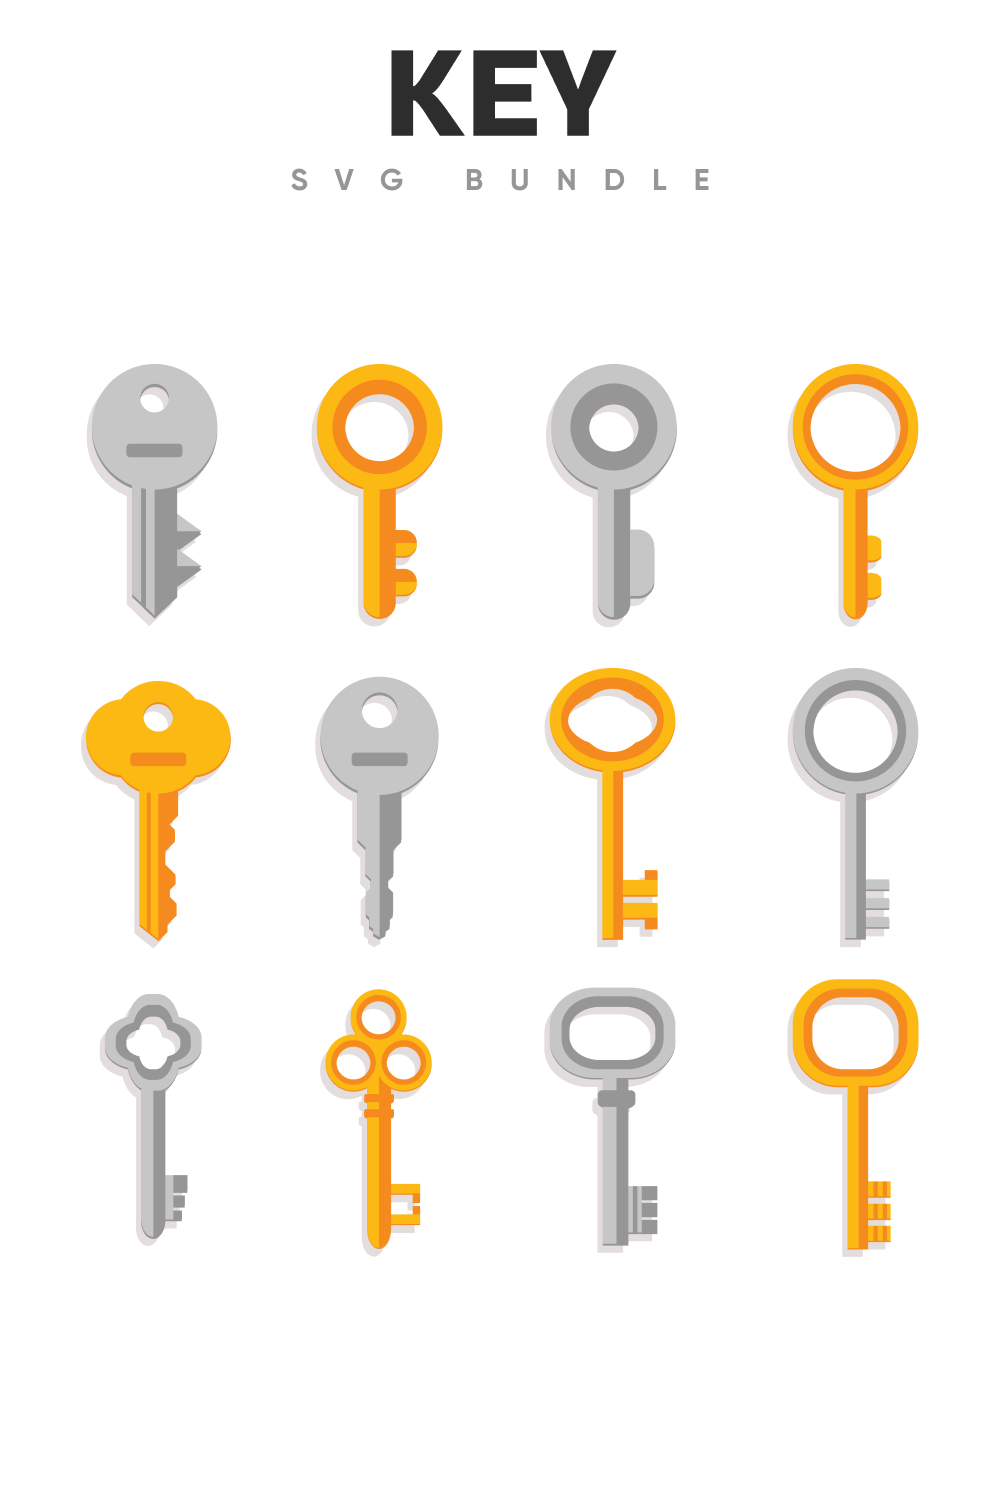 Diverse of silver and gold keys.